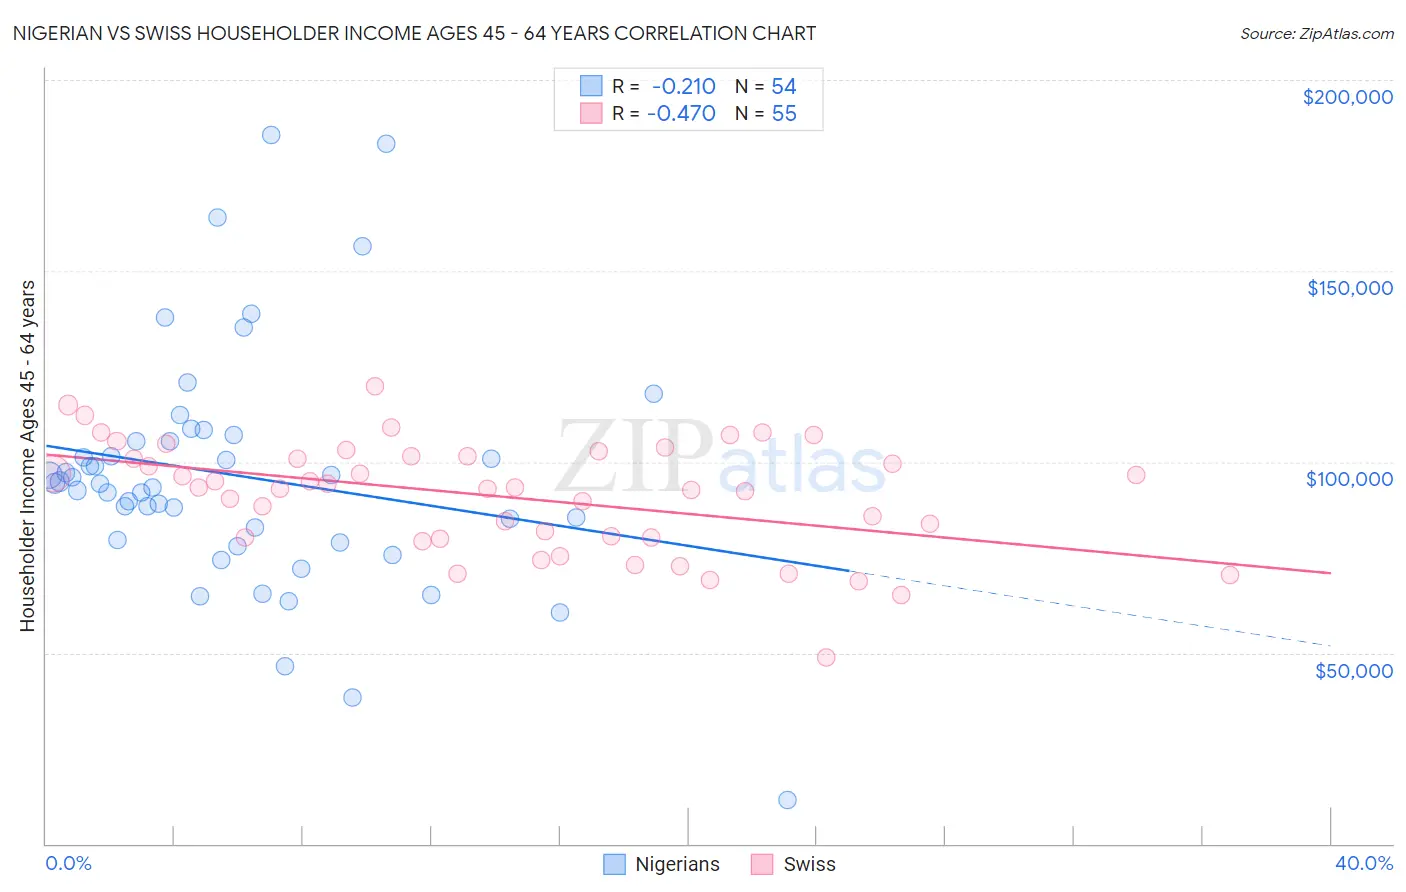 Nigerian vs Swiss Householder Income Ages 45 - 64 years